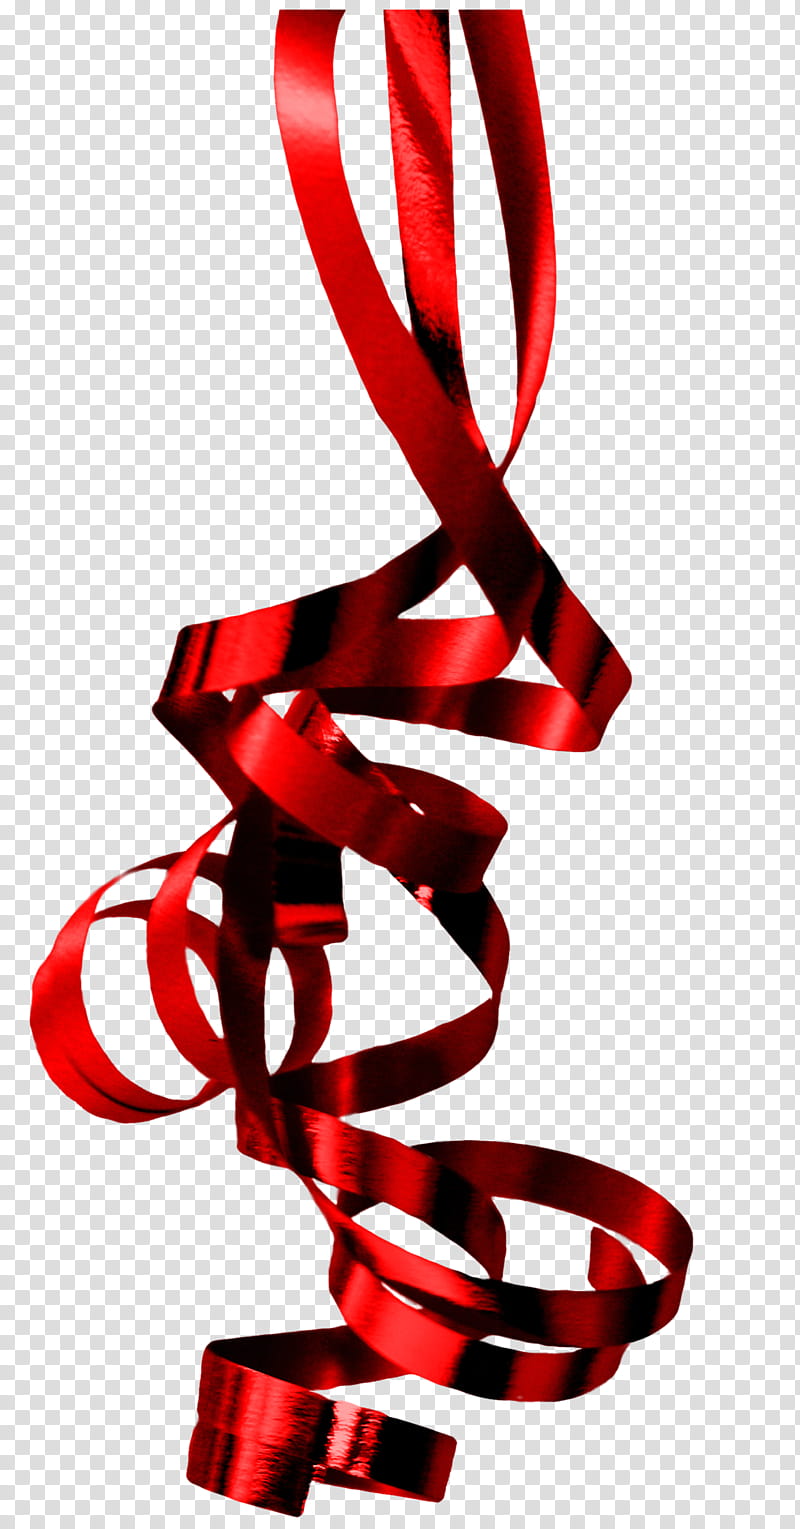 Christmas Ornaments n Ribbons s, red rope transparent background PNG clipart